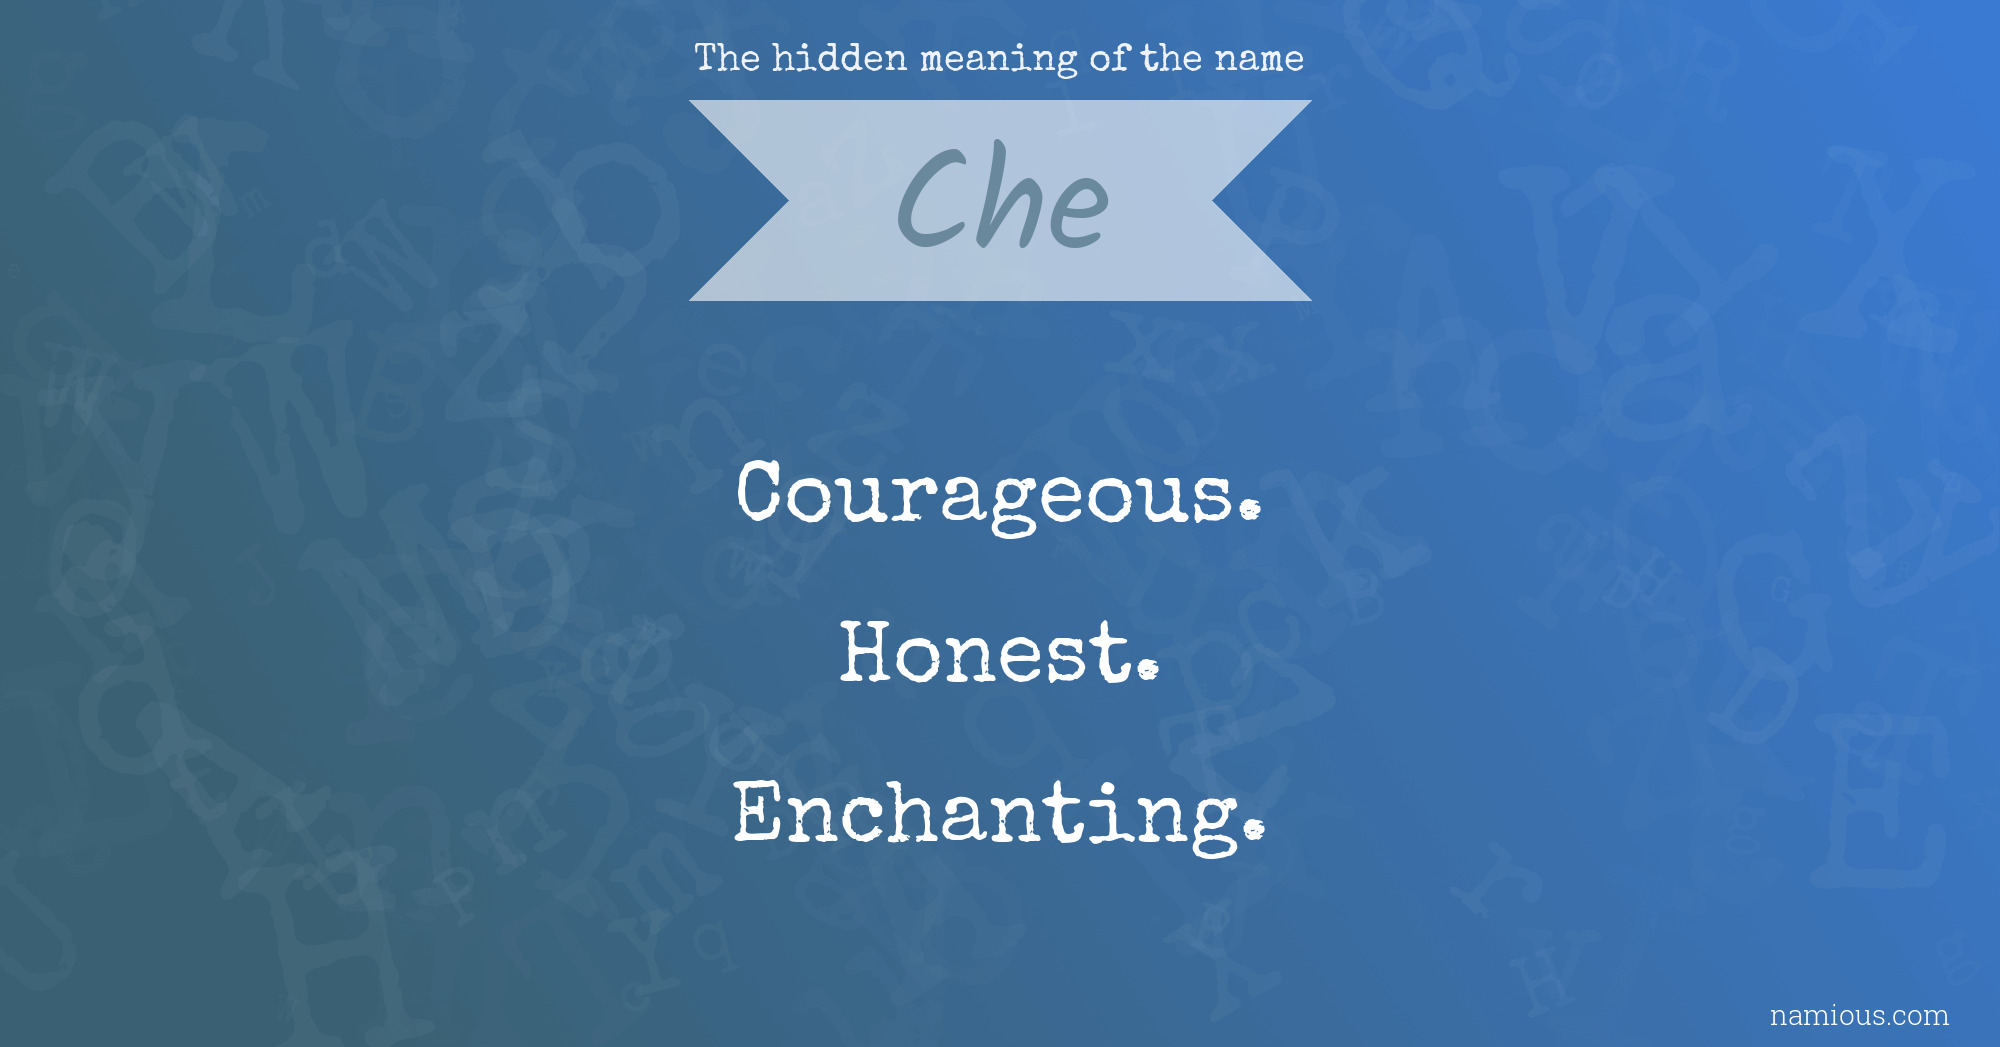 The hidden meaning of the name Che